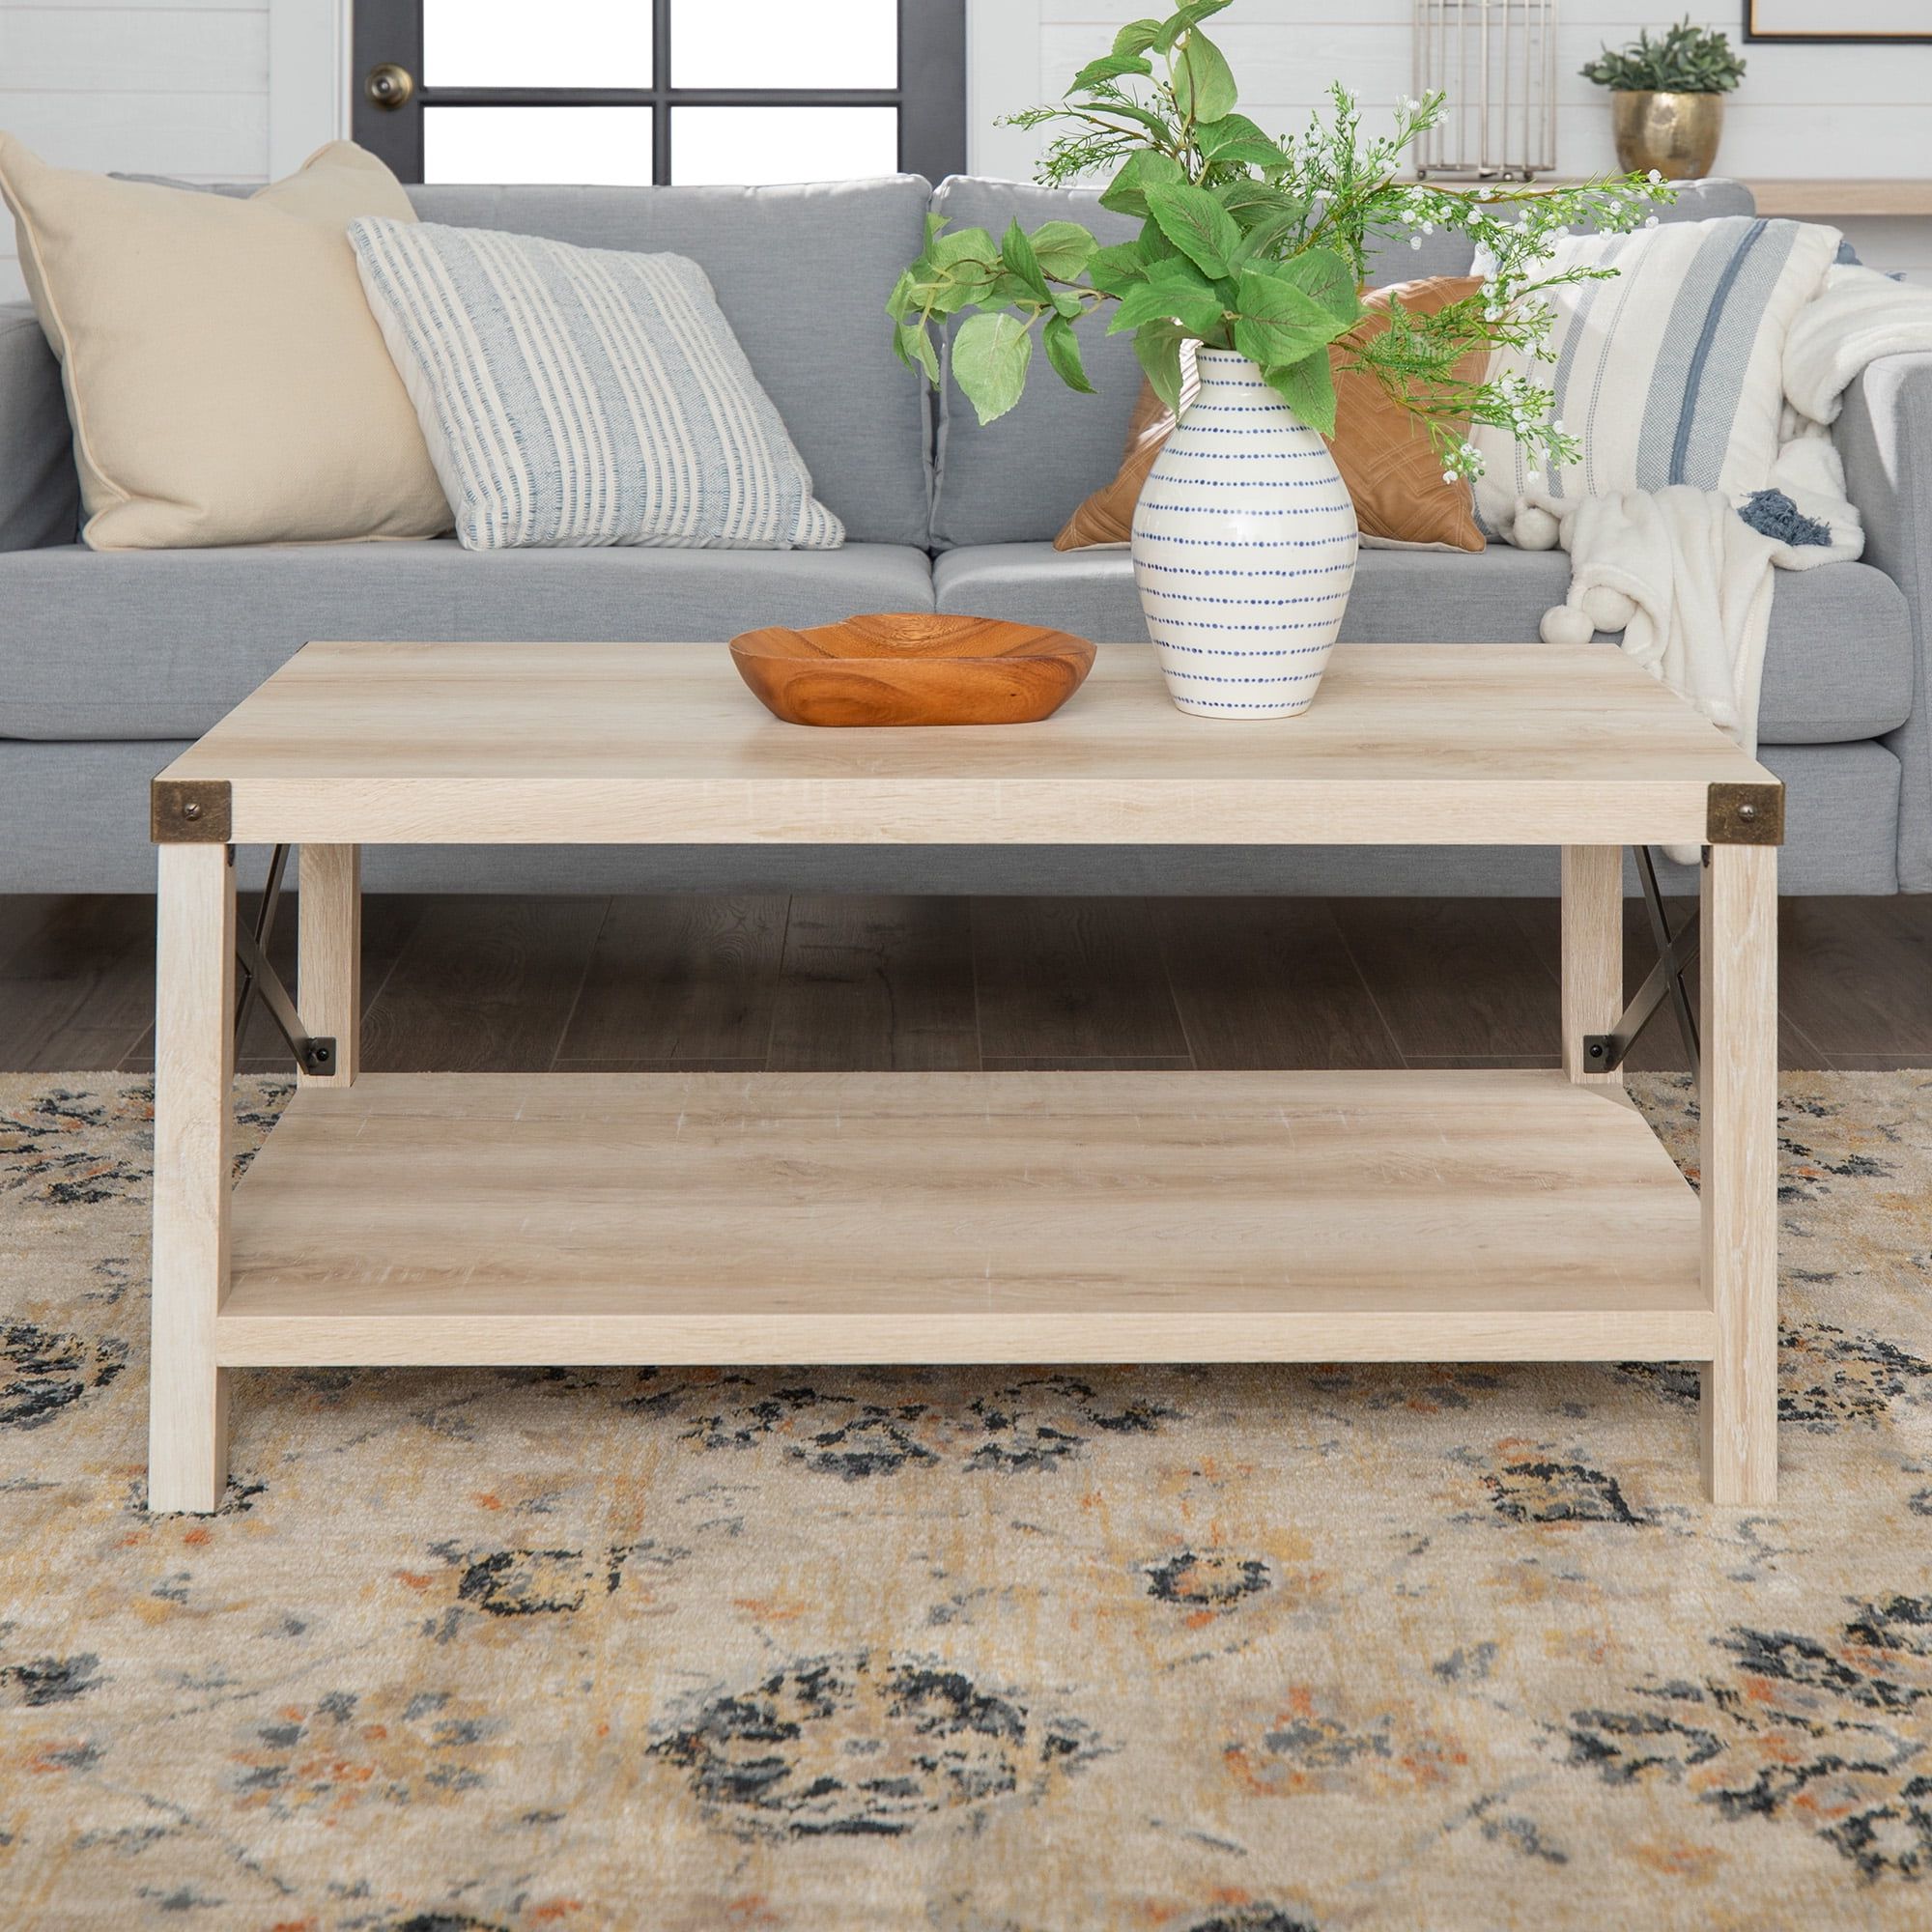 Most Recent Woven Paths Coffee Tables Inside Woven Paths Magnolia Metal X Coffee Table, White Oak – Walmart (View 10 of 15)